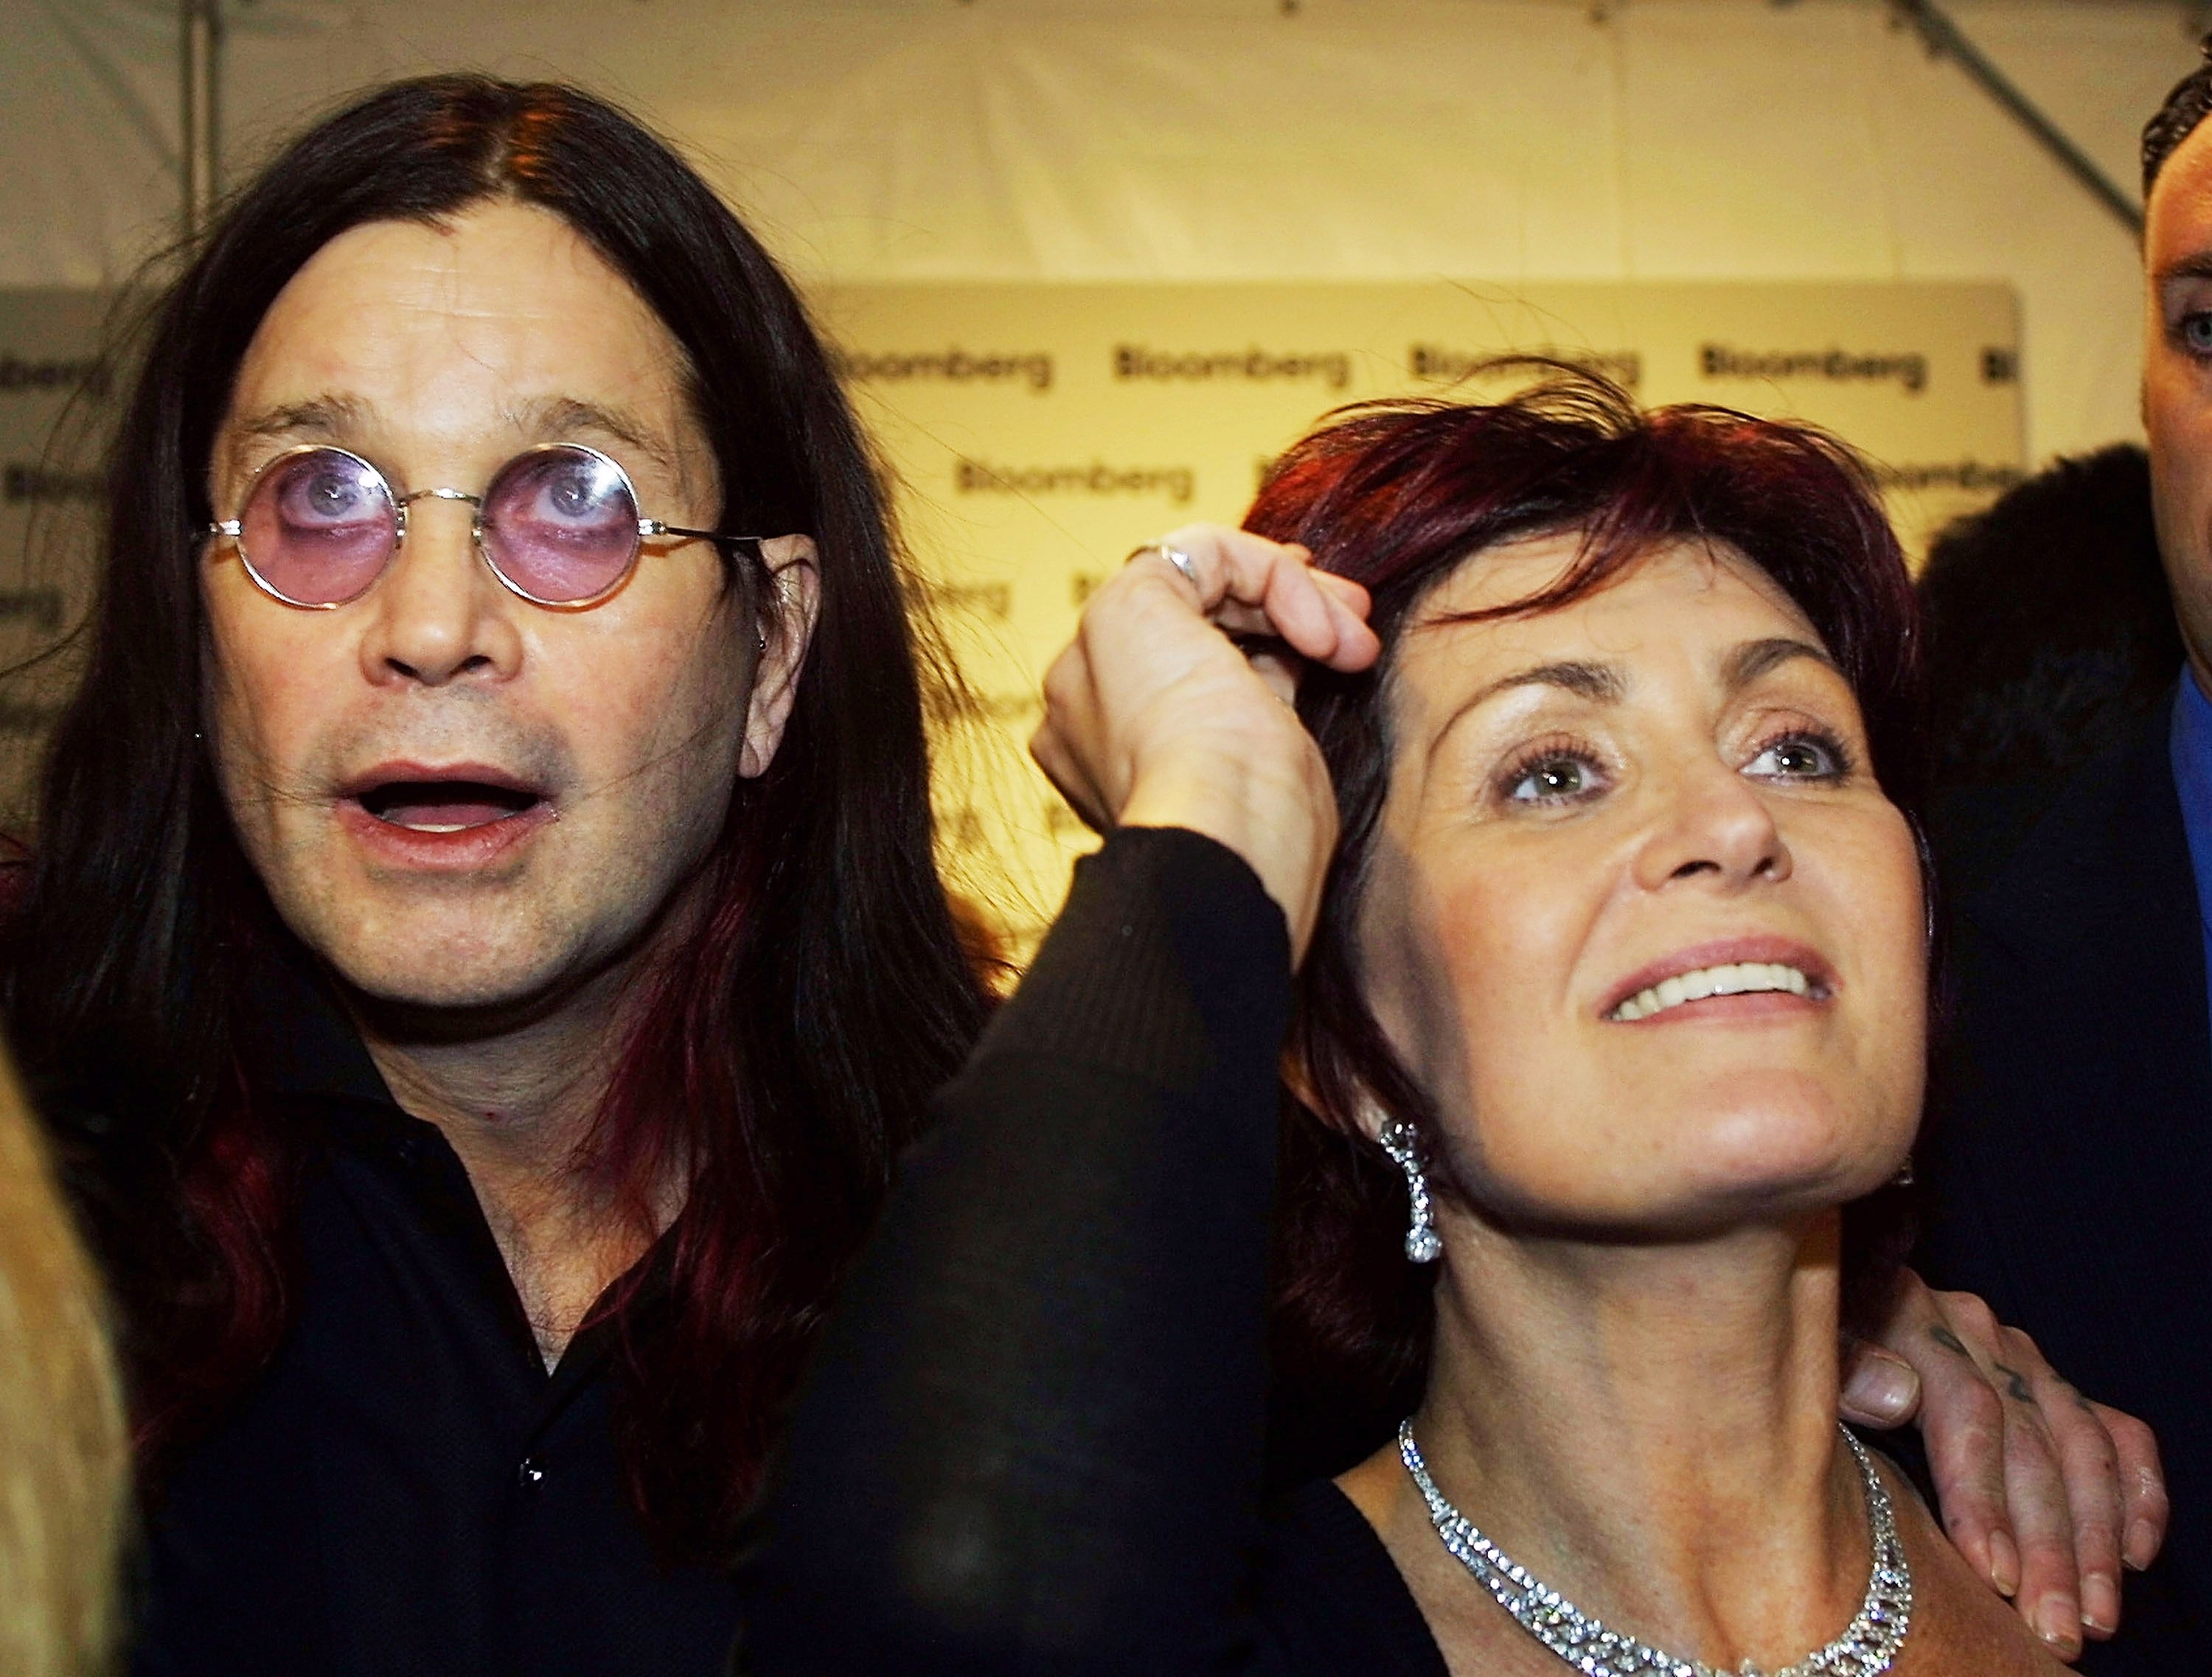 Ozzy Osbourne and Sharon Osbourne at the Bloomberg party on May 4, 2002 in Washington, DC. | Source: Getty Images